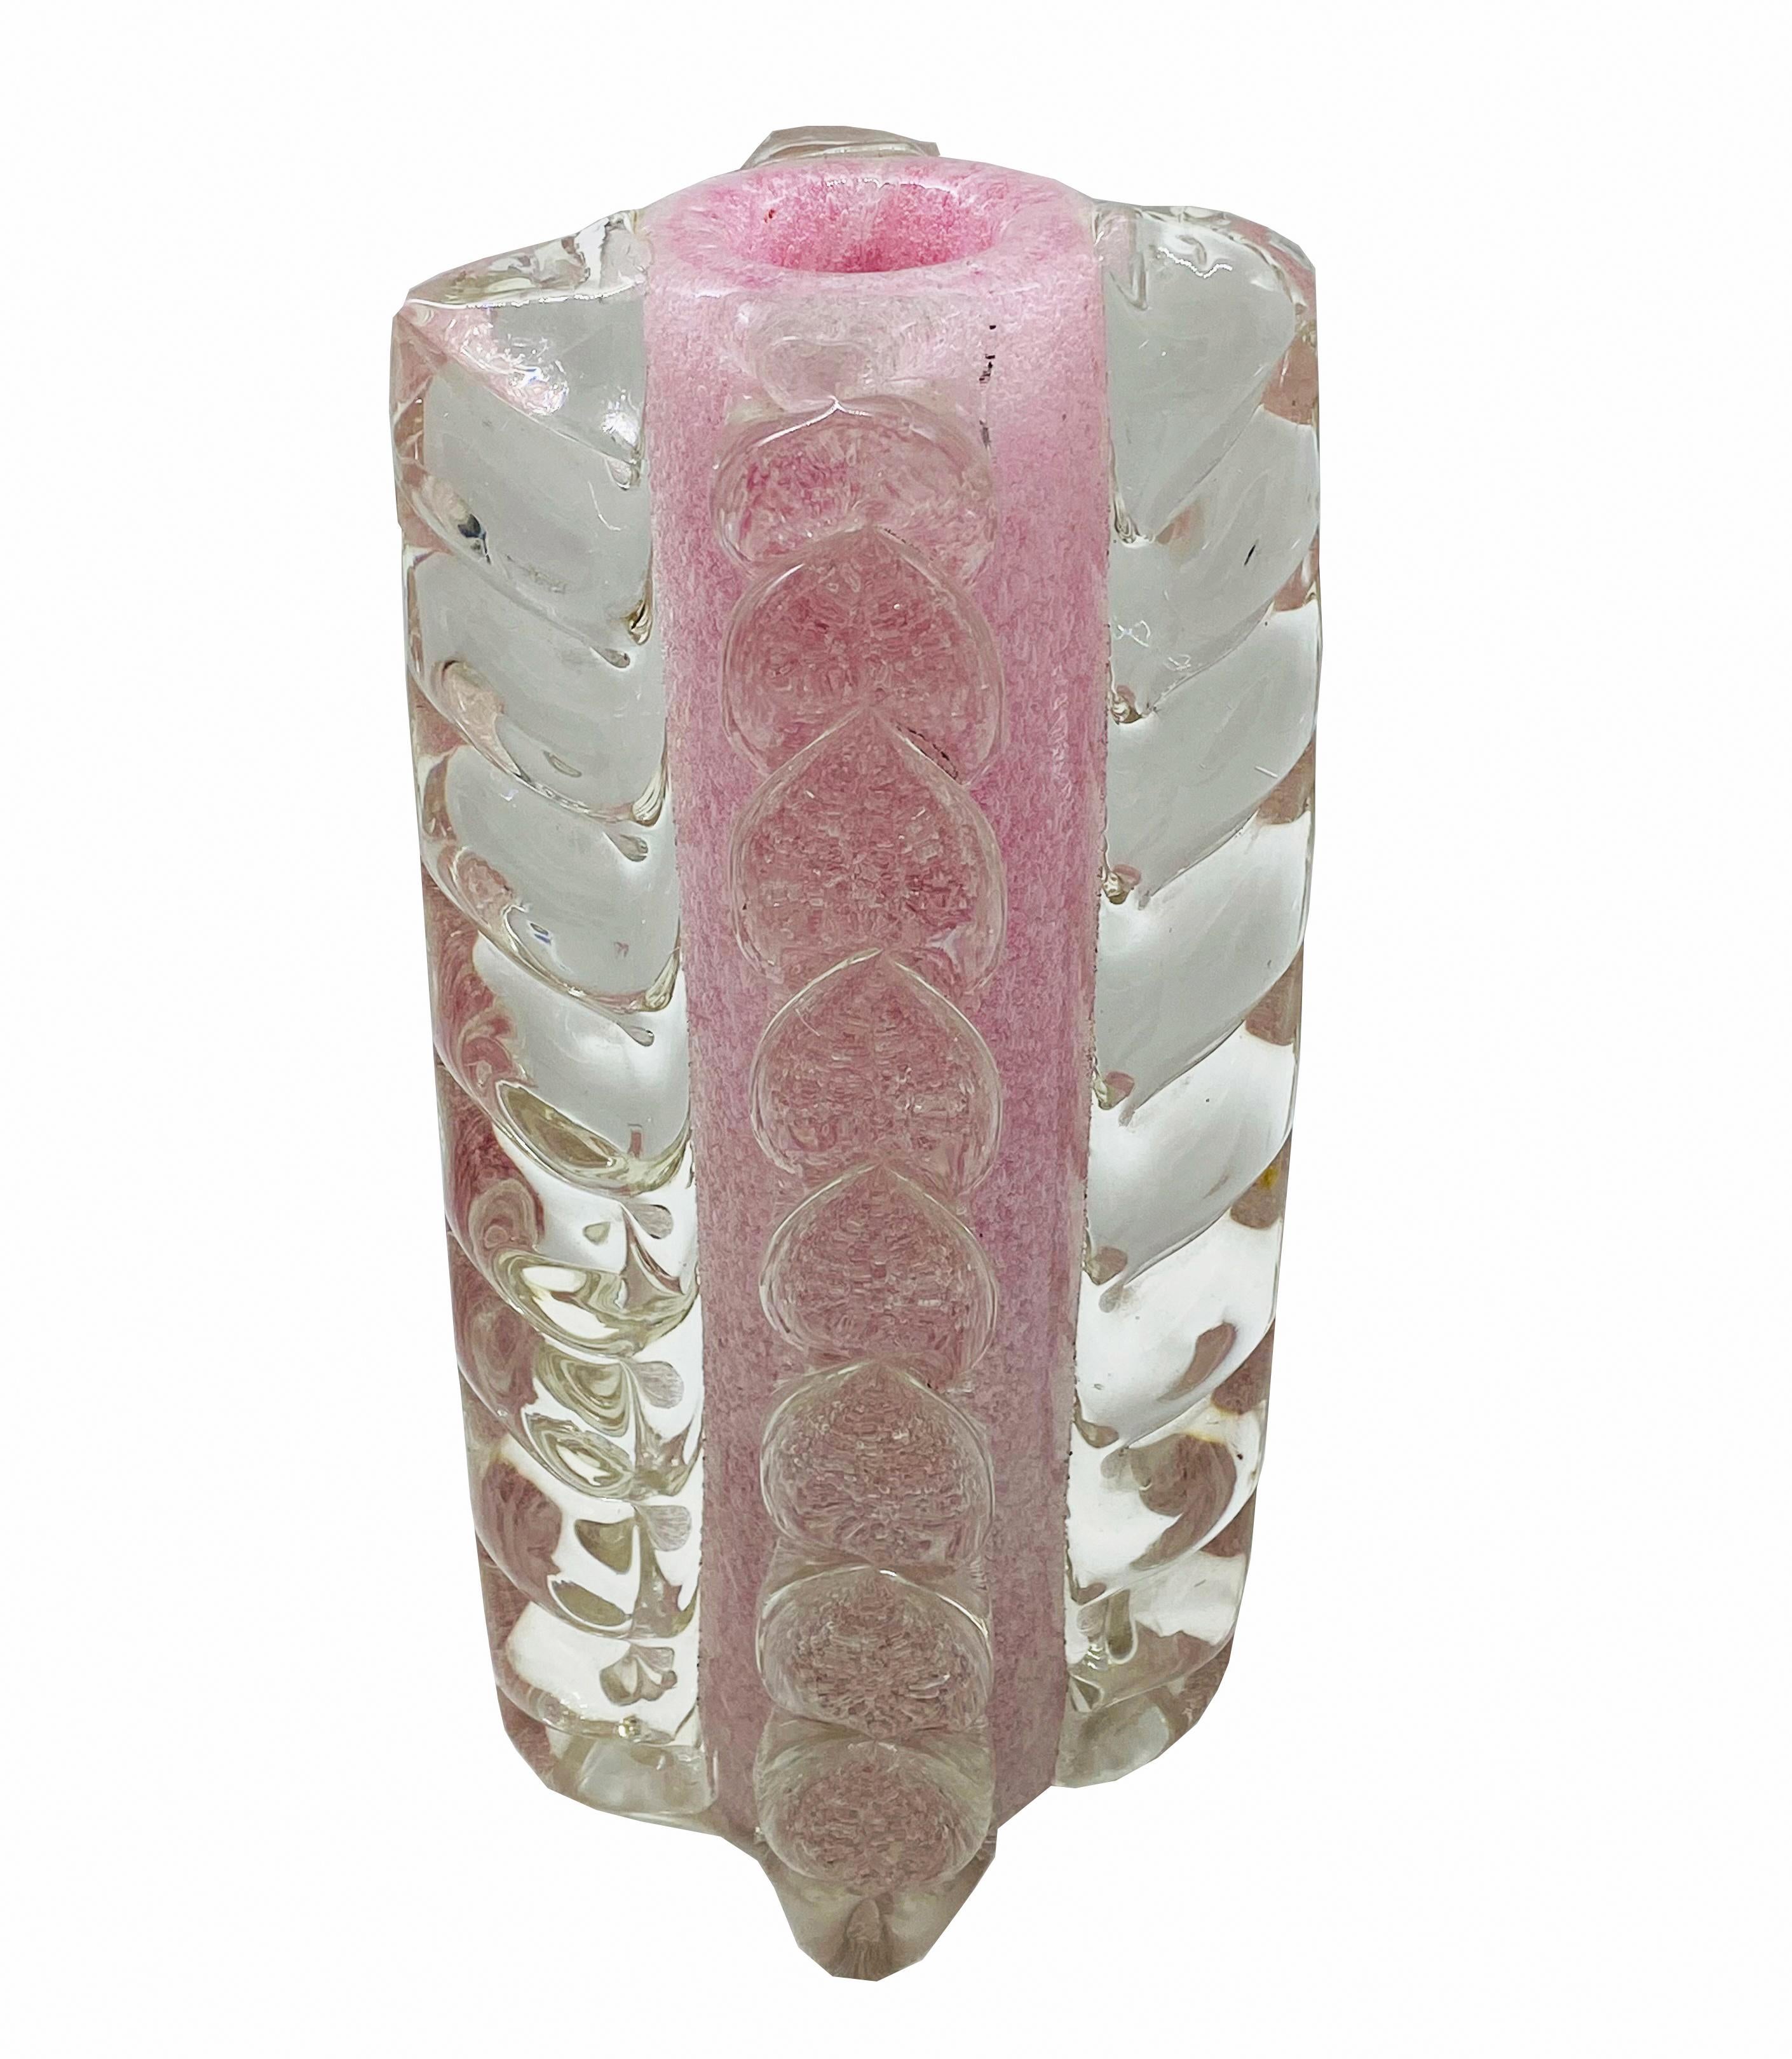 A very rare vase Mod. Spuma di Mare in Murano glass swarming with inclusions of matallic oxides and application of large morise, by Ercole Barovier for Barovier & Toso 1940. Make a small piece of morise.